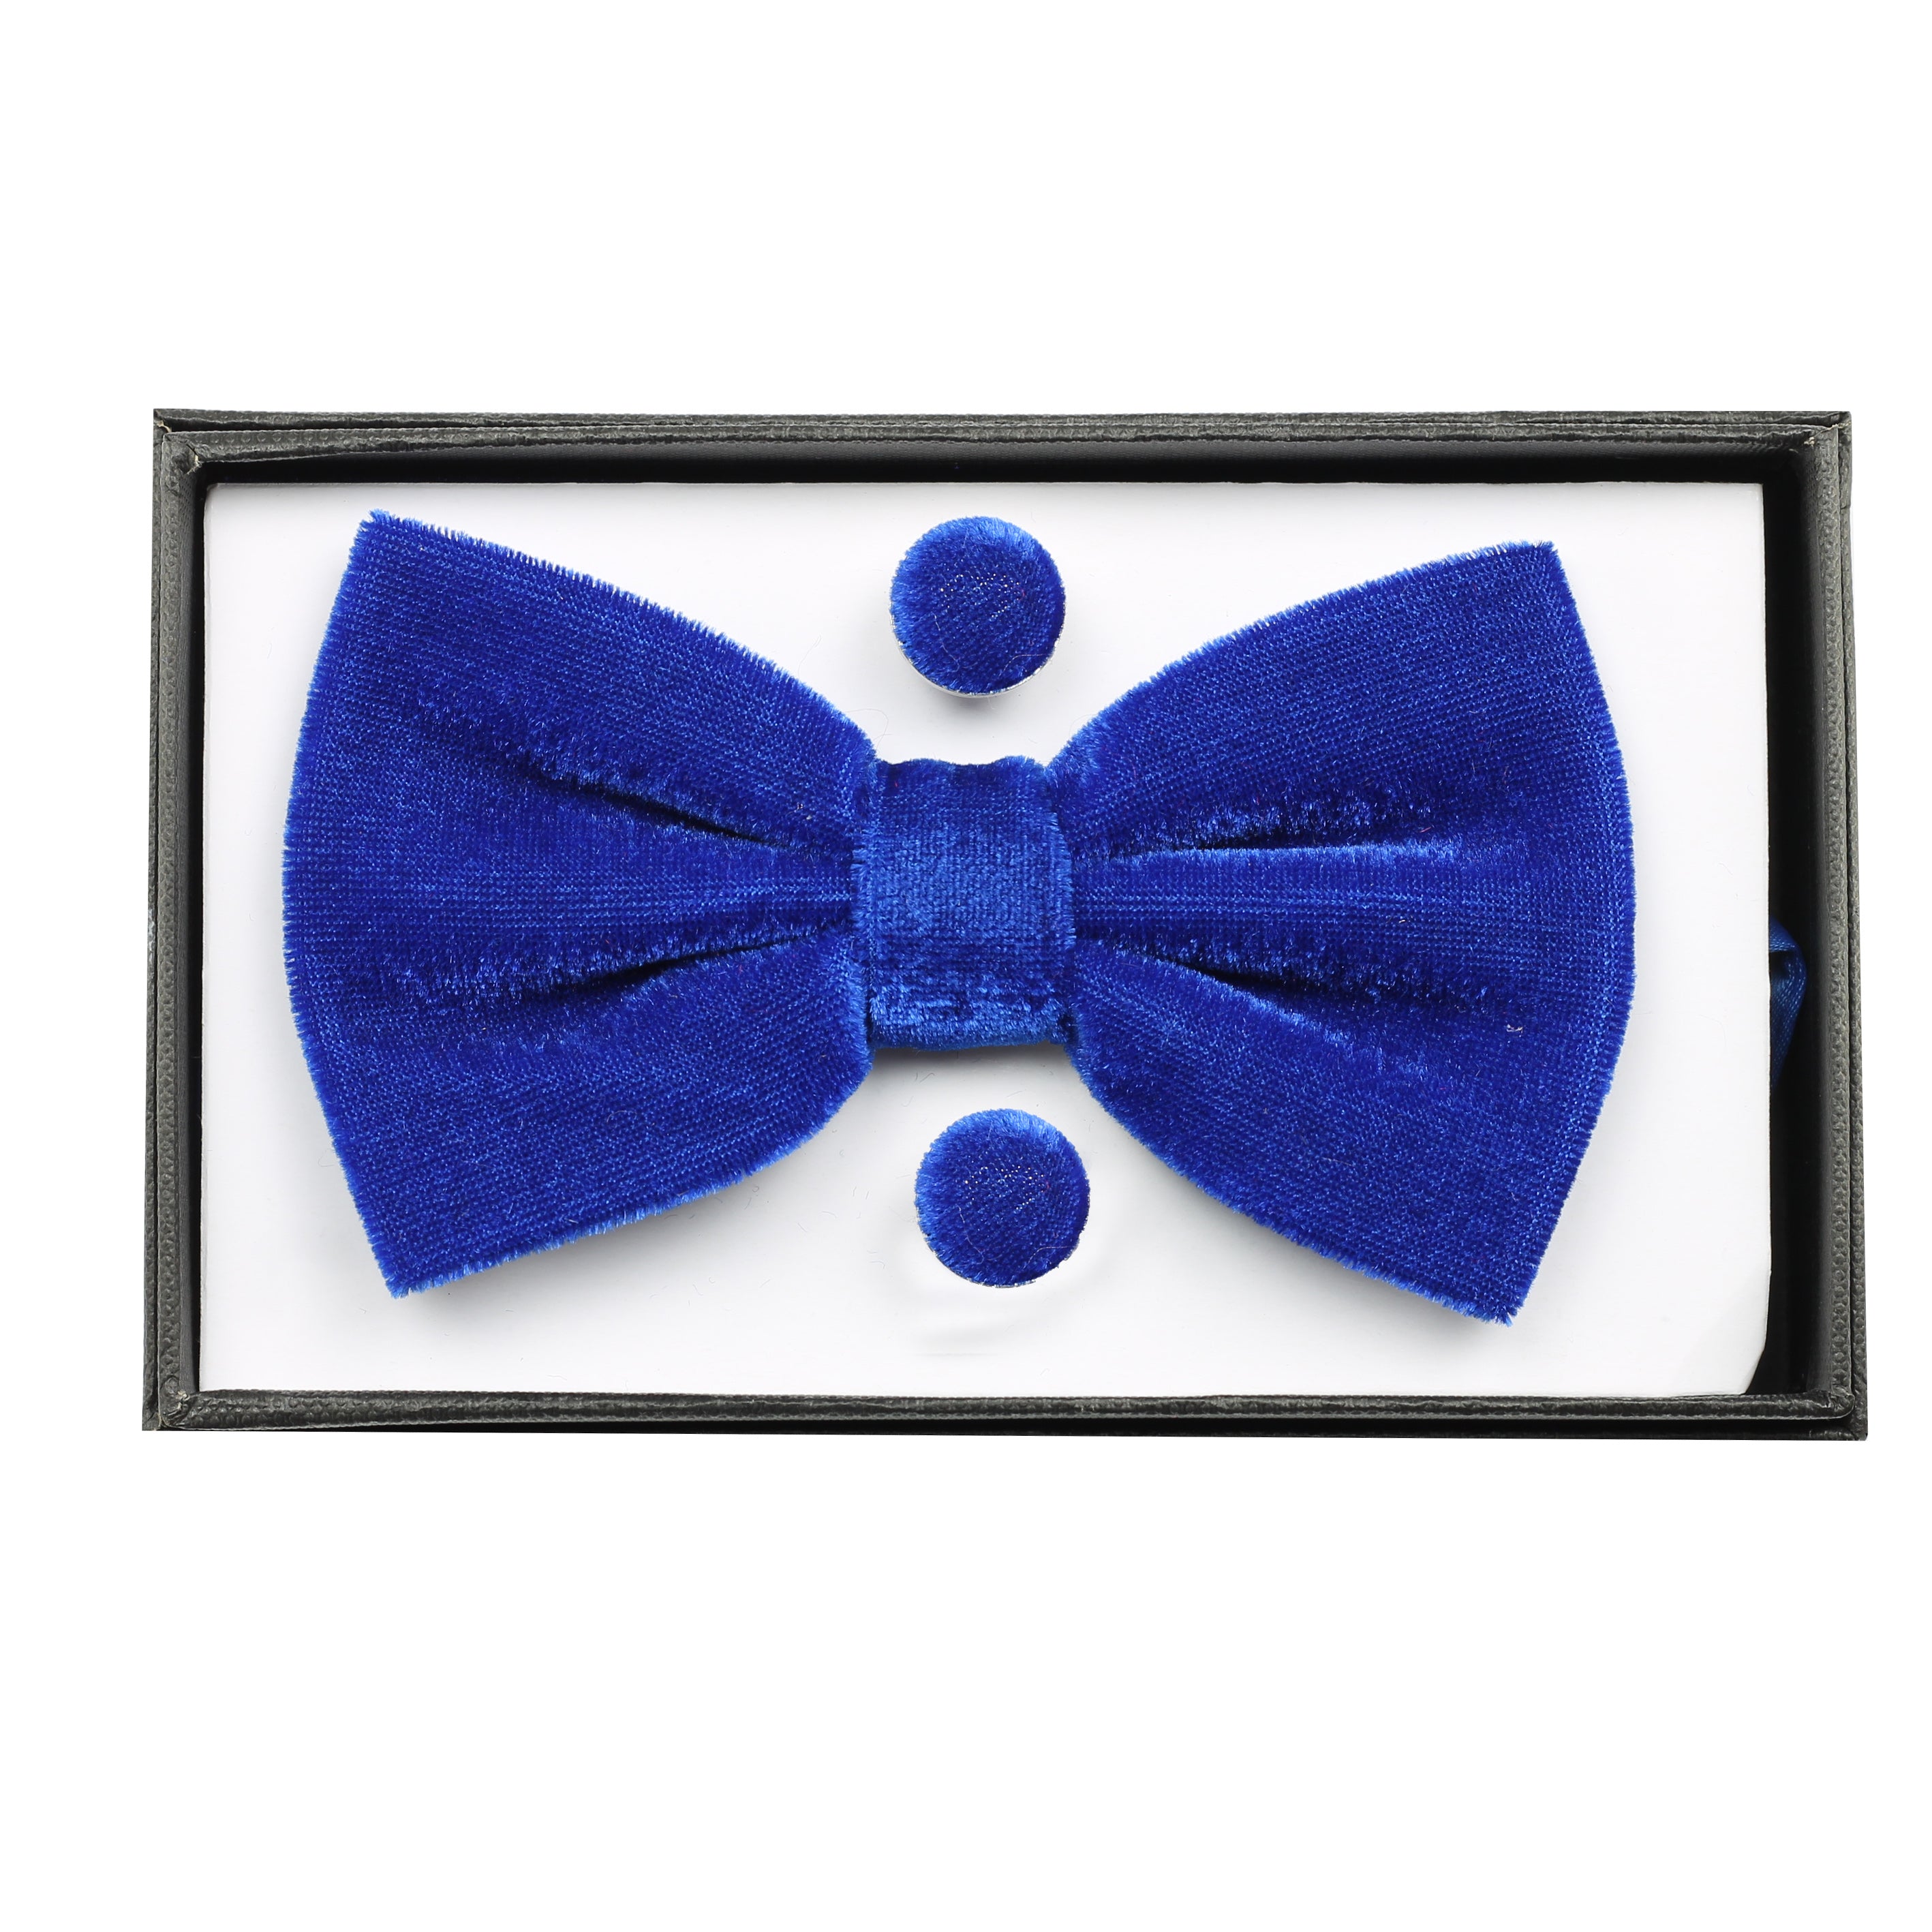 Blue Shiny Velvet Bow Tie With Cufflink Pocket Square